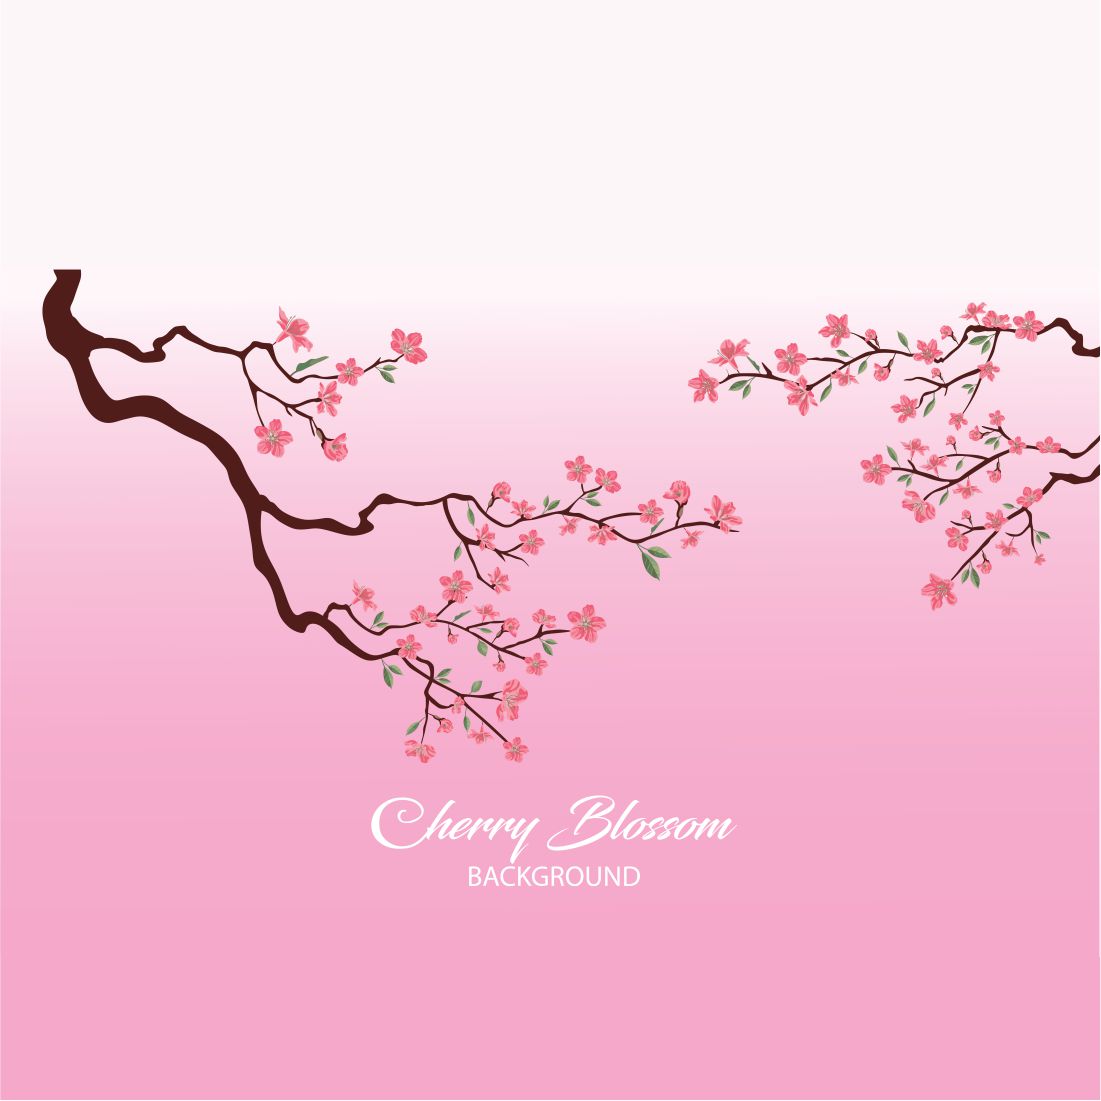 Cherry blossom Illustration preview image.